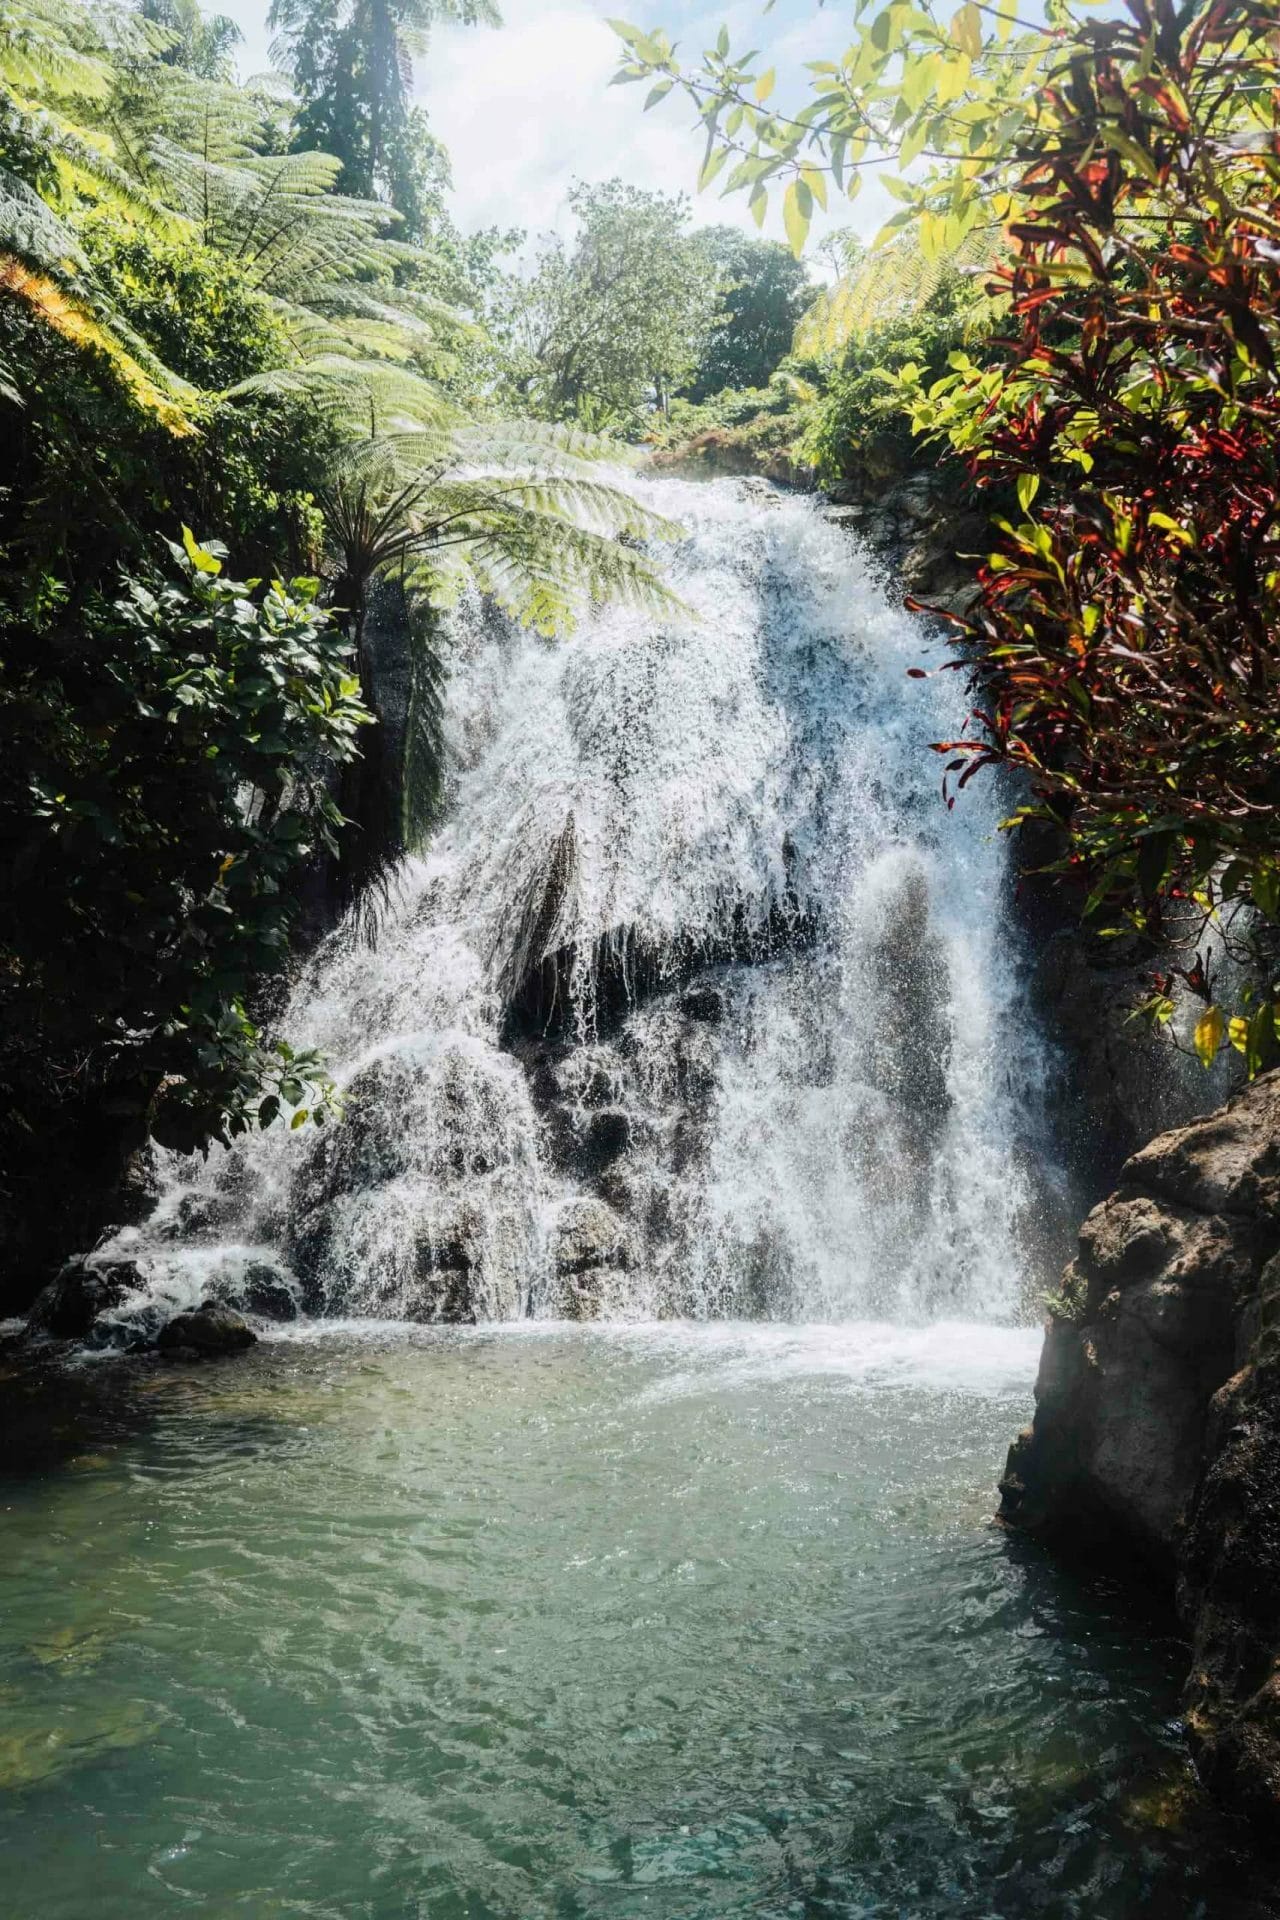 An Insider's Guide to Maewo, Vanuatu, photos by Ain Raadik and Ben Savage, Talise village, sparkling waterfalls, jungle